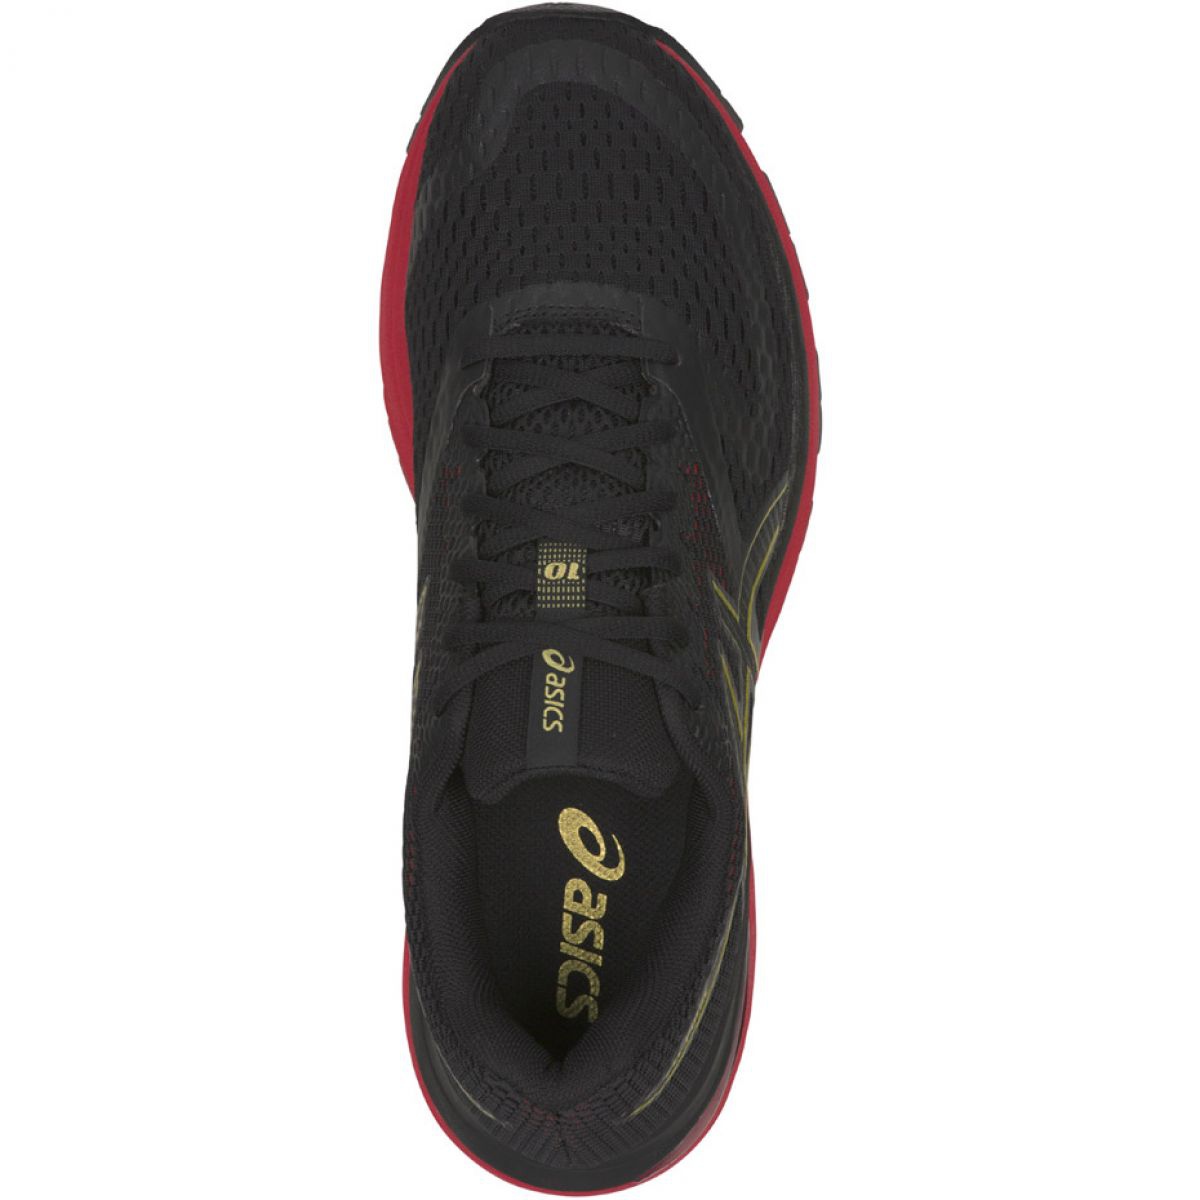 daño Armstrong juego Running shoes Asics Gel-Pulse 10 M 1011A604-001 black red yellow - KeeShoes